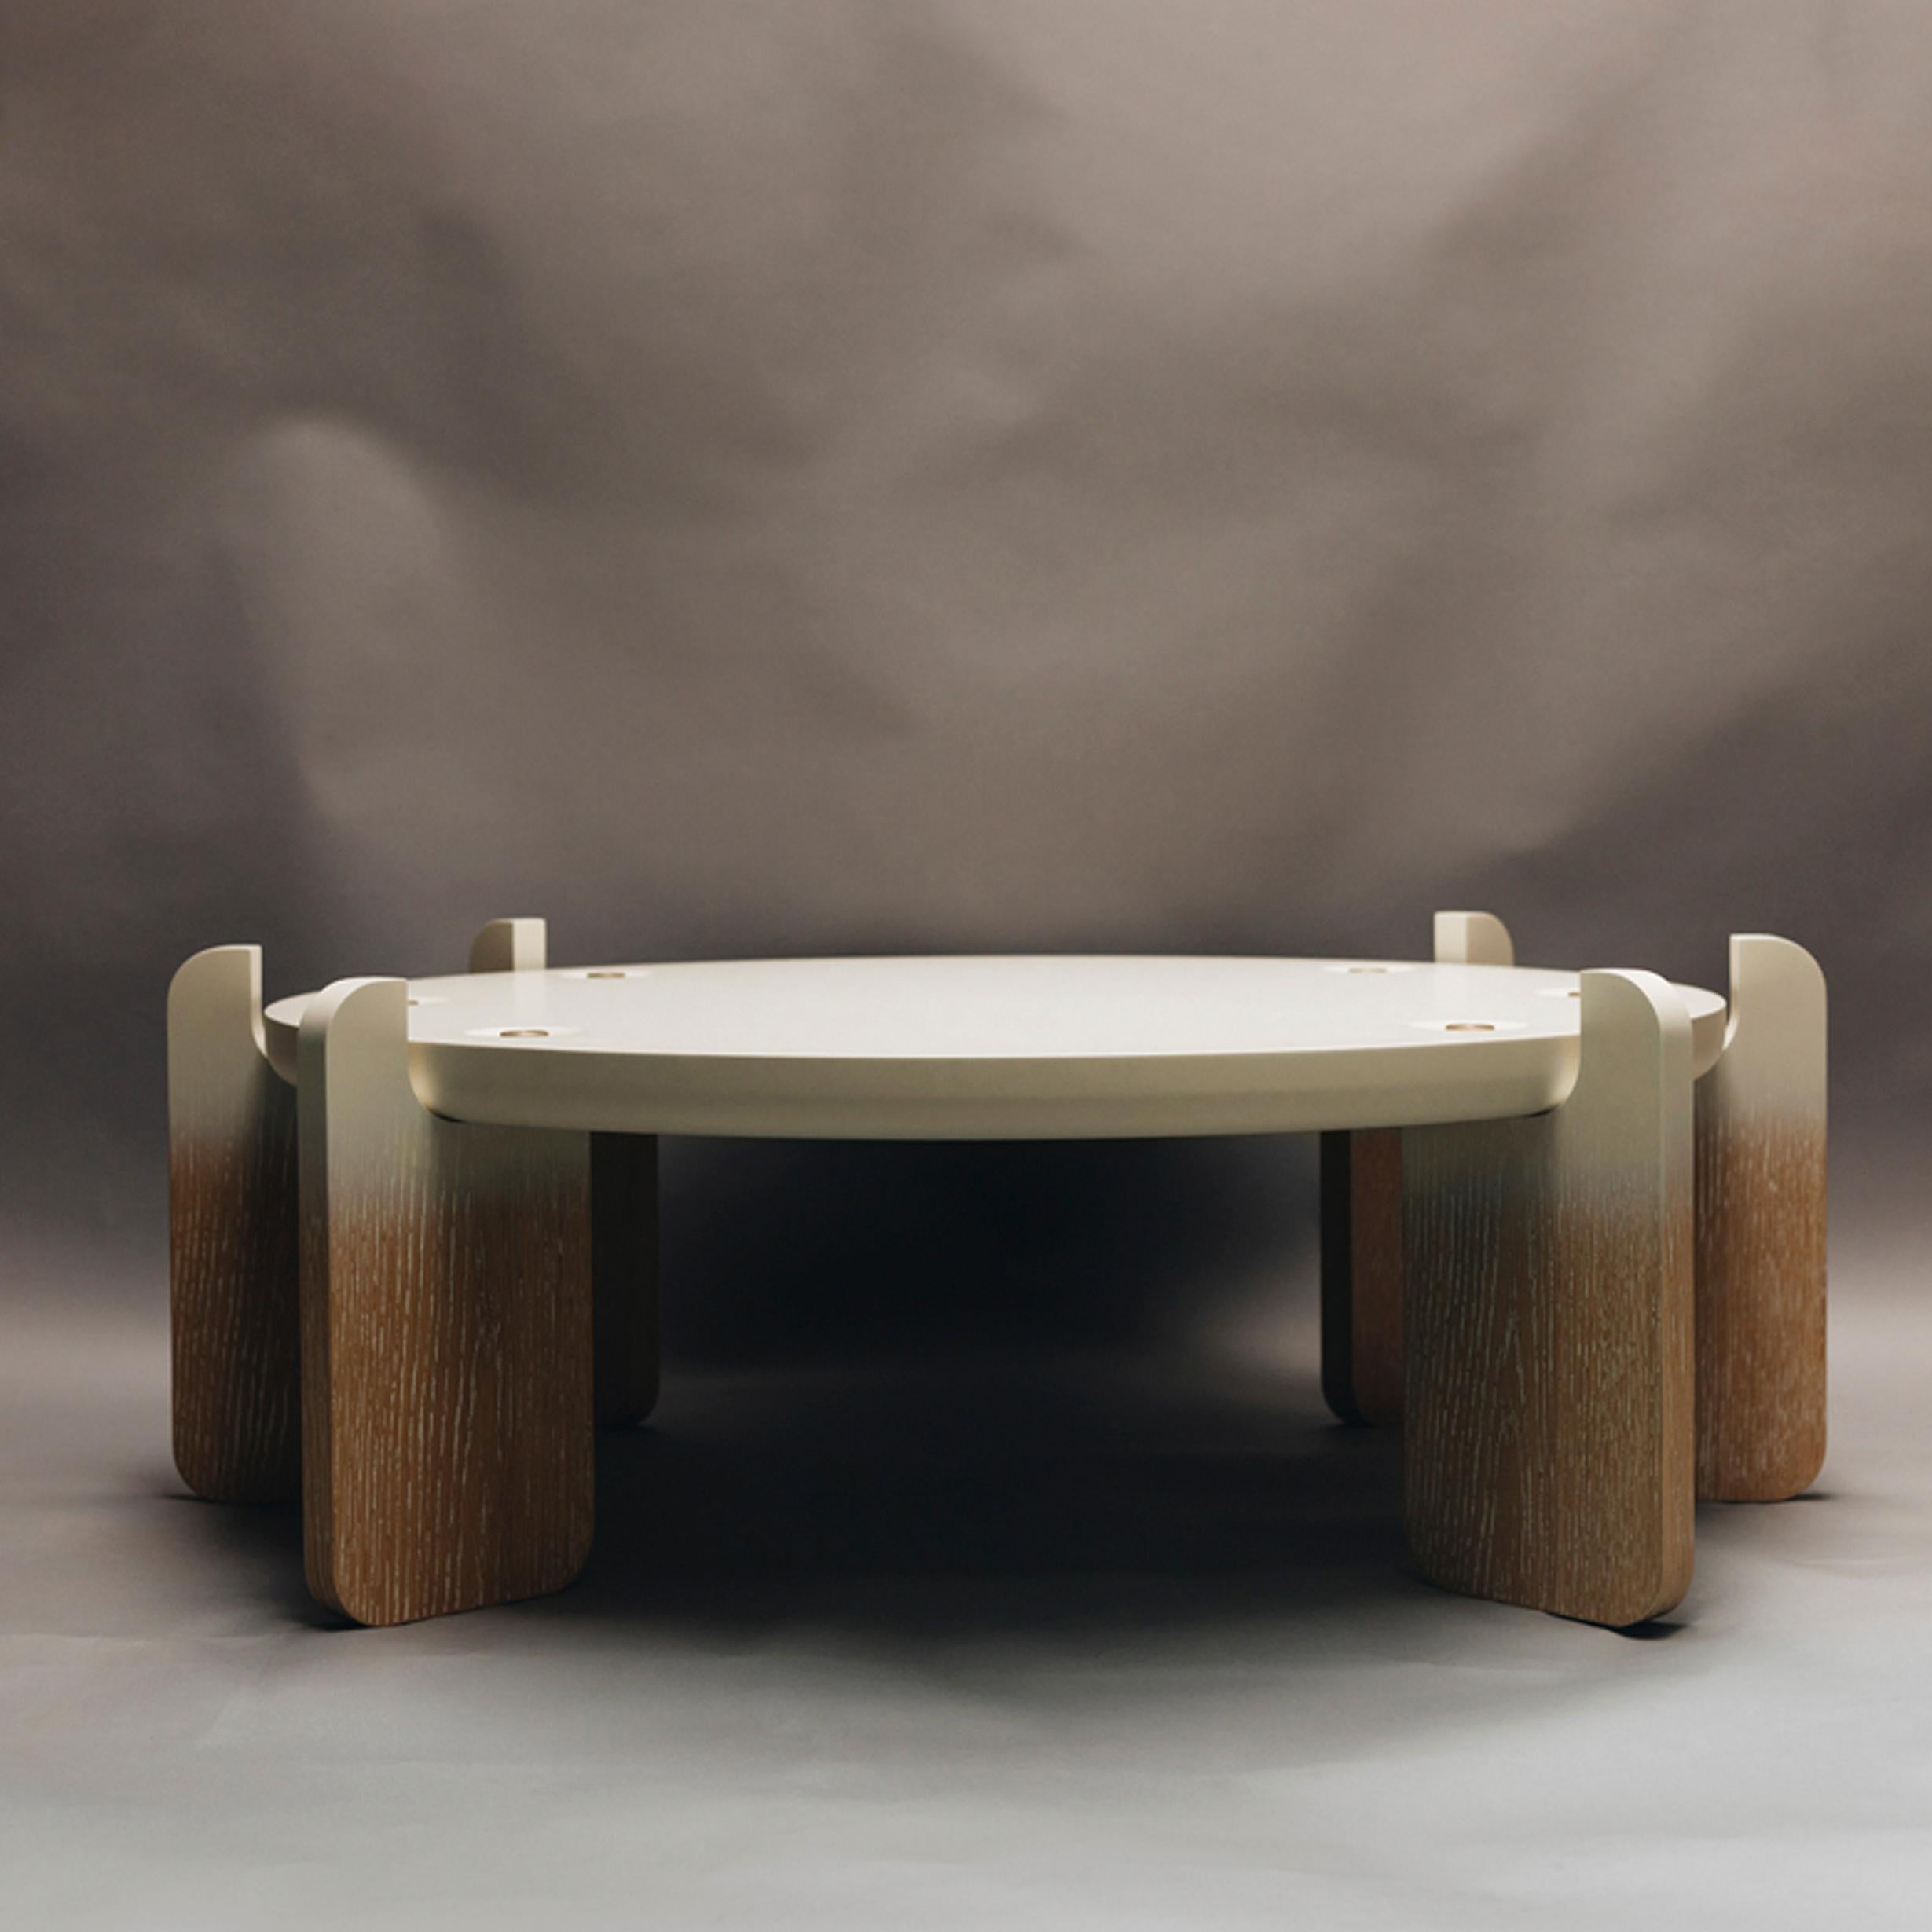 Ipanema Coffee Table, Natural Limed Oak with Ombre Effect by Duistt

The rounded geometric shapes of the ipanema series refer to the imagination of the well-known sidewalk in rio de janeiro. We wanted to invest in fresh finishes, with colours that